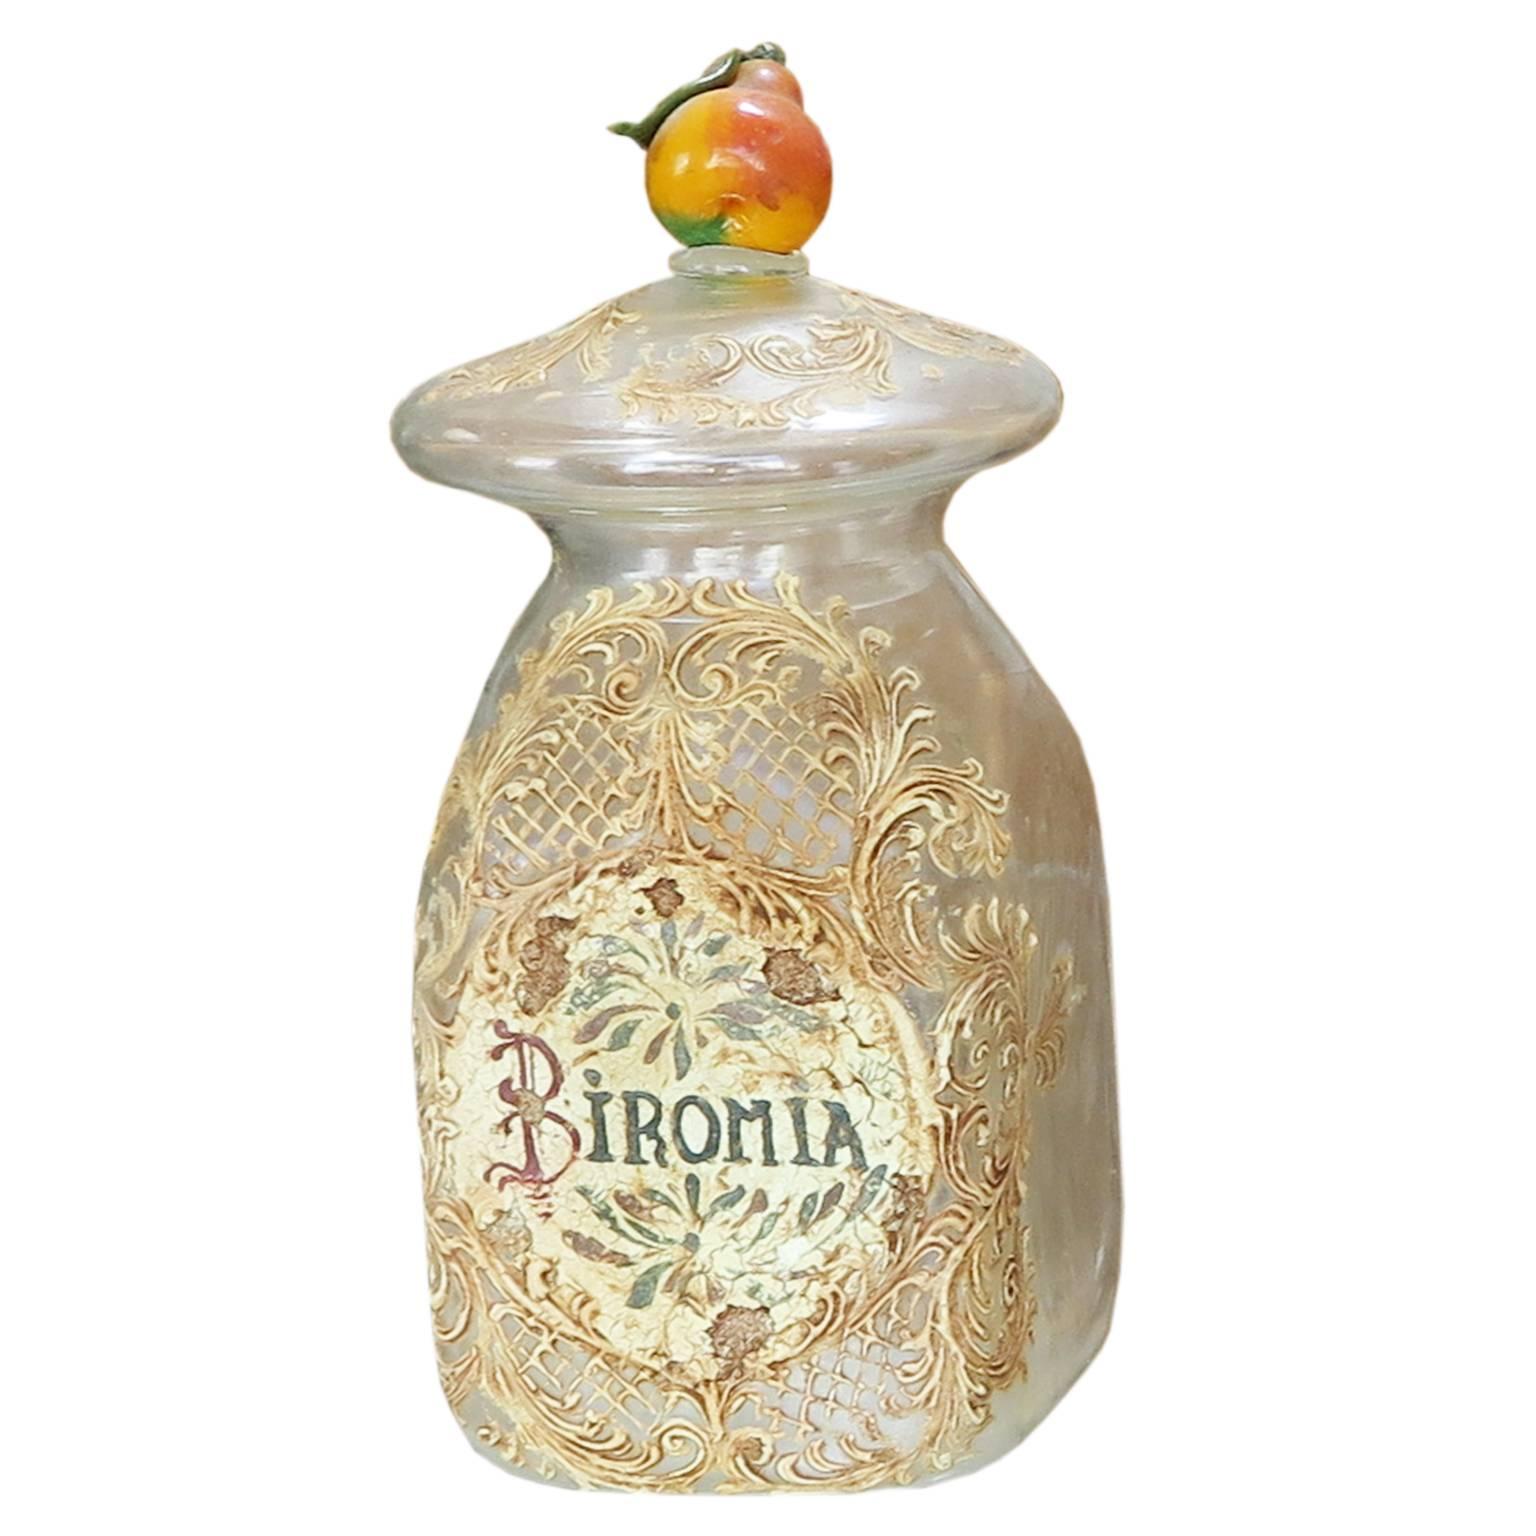 Six beautiful handblown Venetian glass jars with antiqued relief ornamentation. All jars have old names of spices or ingredients on the front. The lid of each jar is decorated with a different type of fruit.
The jars are in original condition.